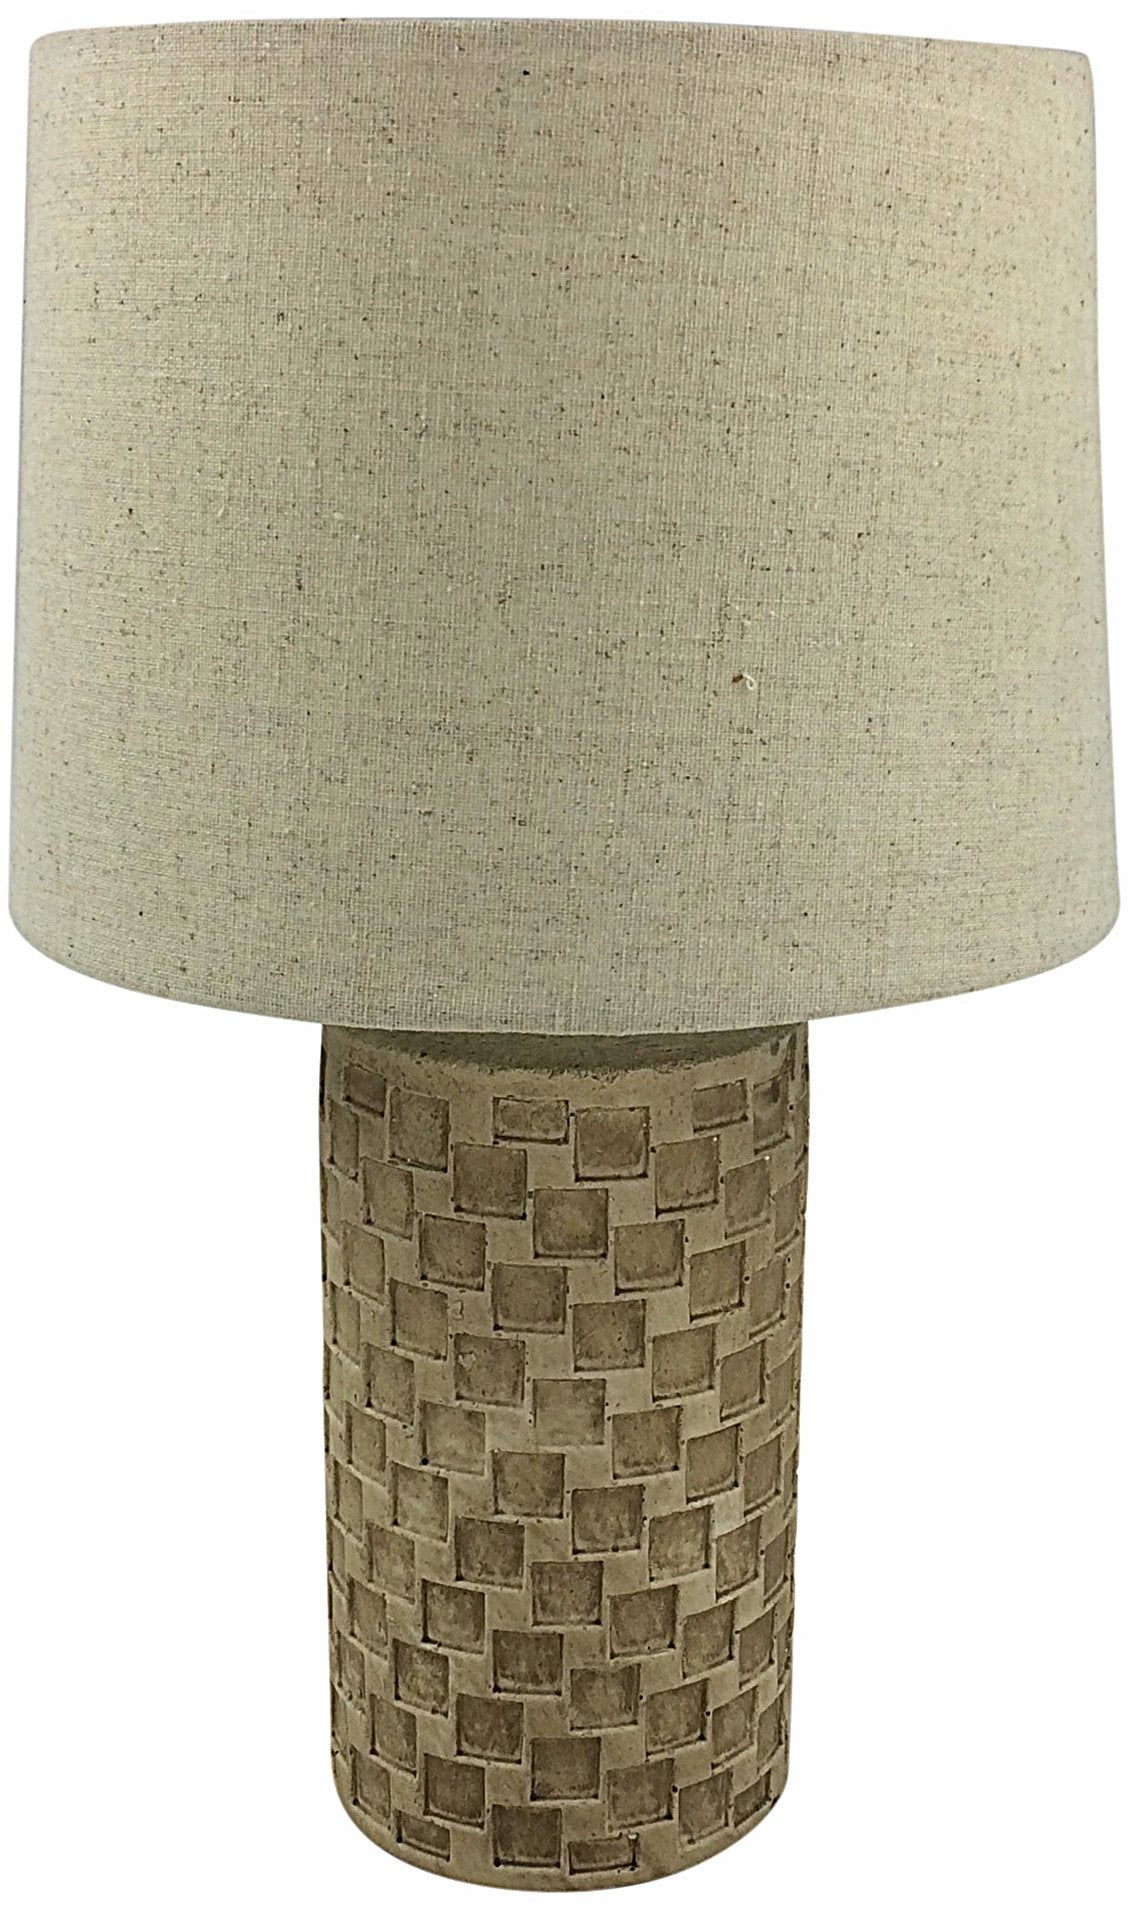 Beige Tile Lamp And Shade 38cm